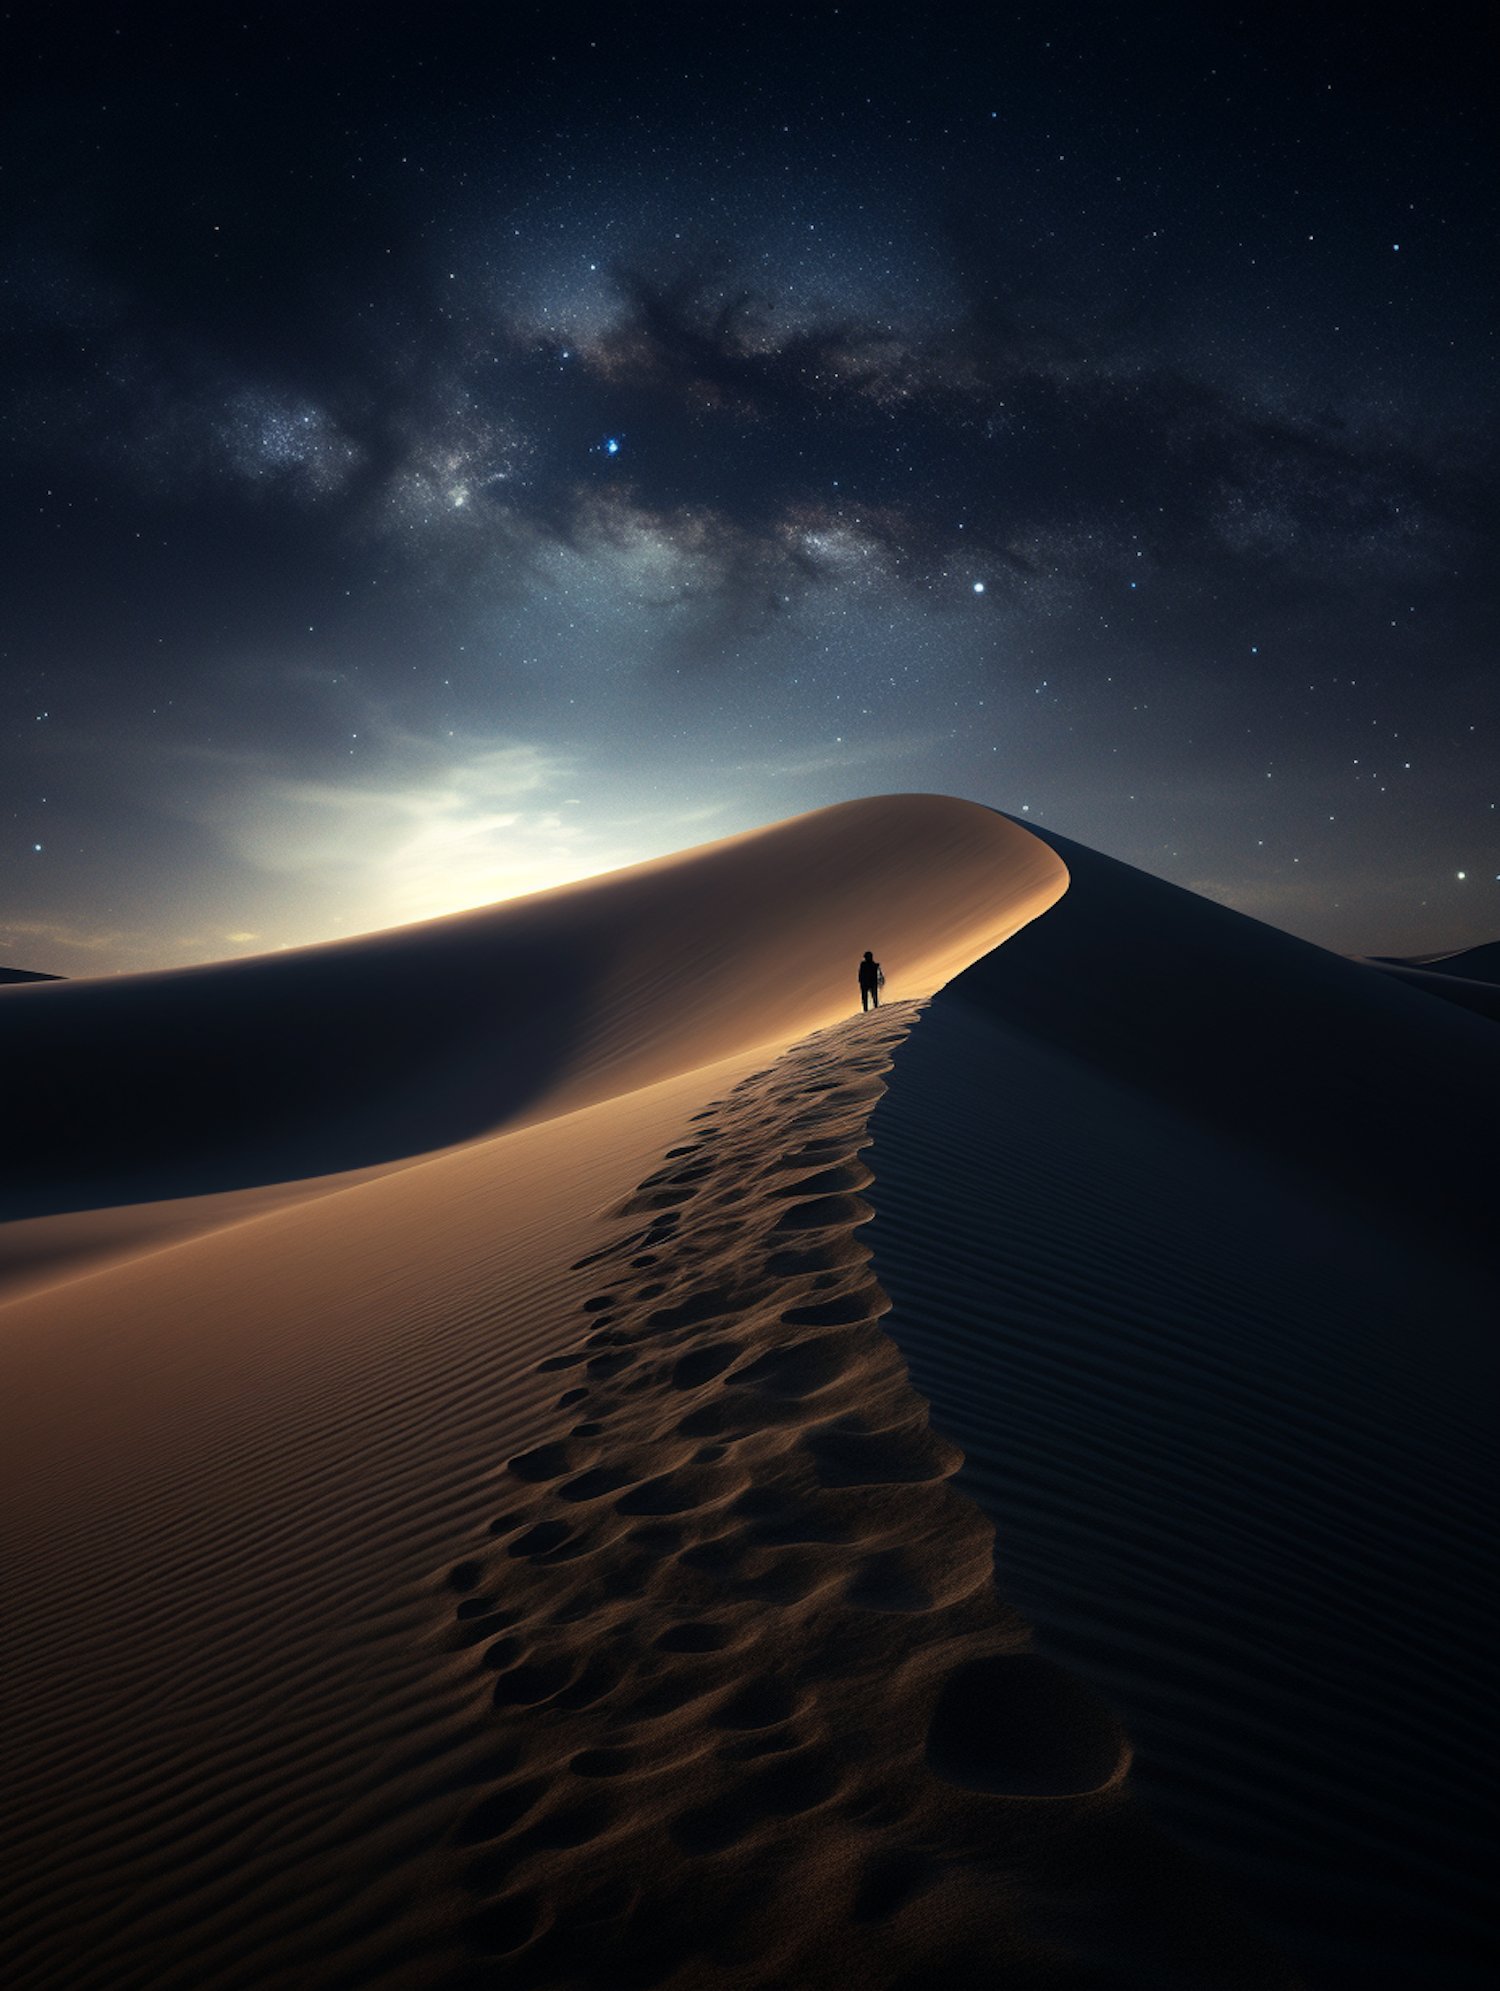 Cosmic Contemplation on the Dunes